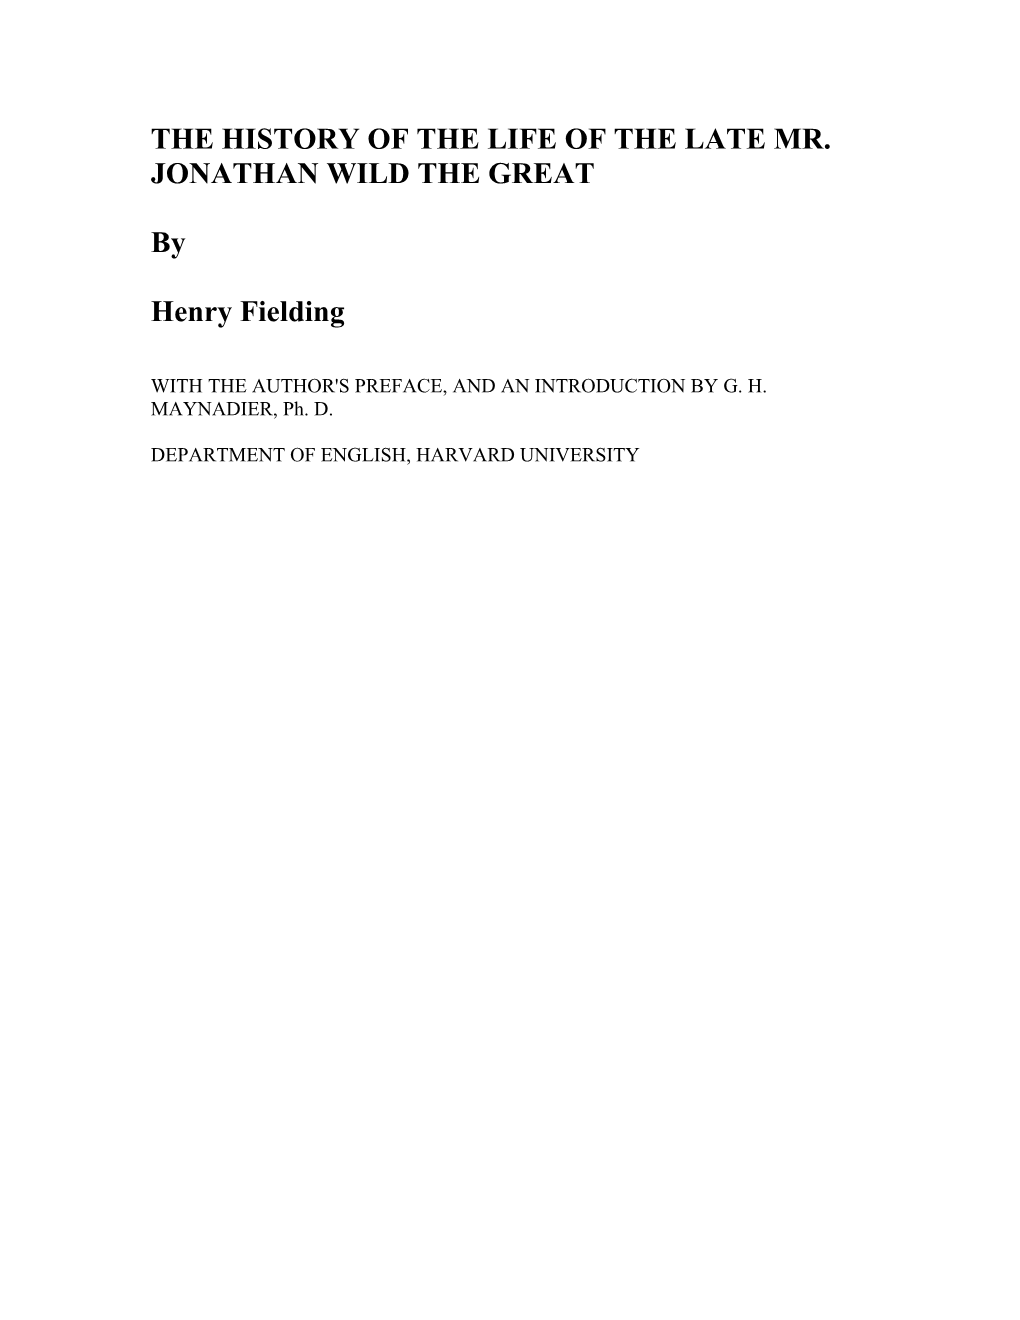 THE HISTORY of the LIFE of the LATER MR. JONATHAN WILD the GREAT by Henry Fielding